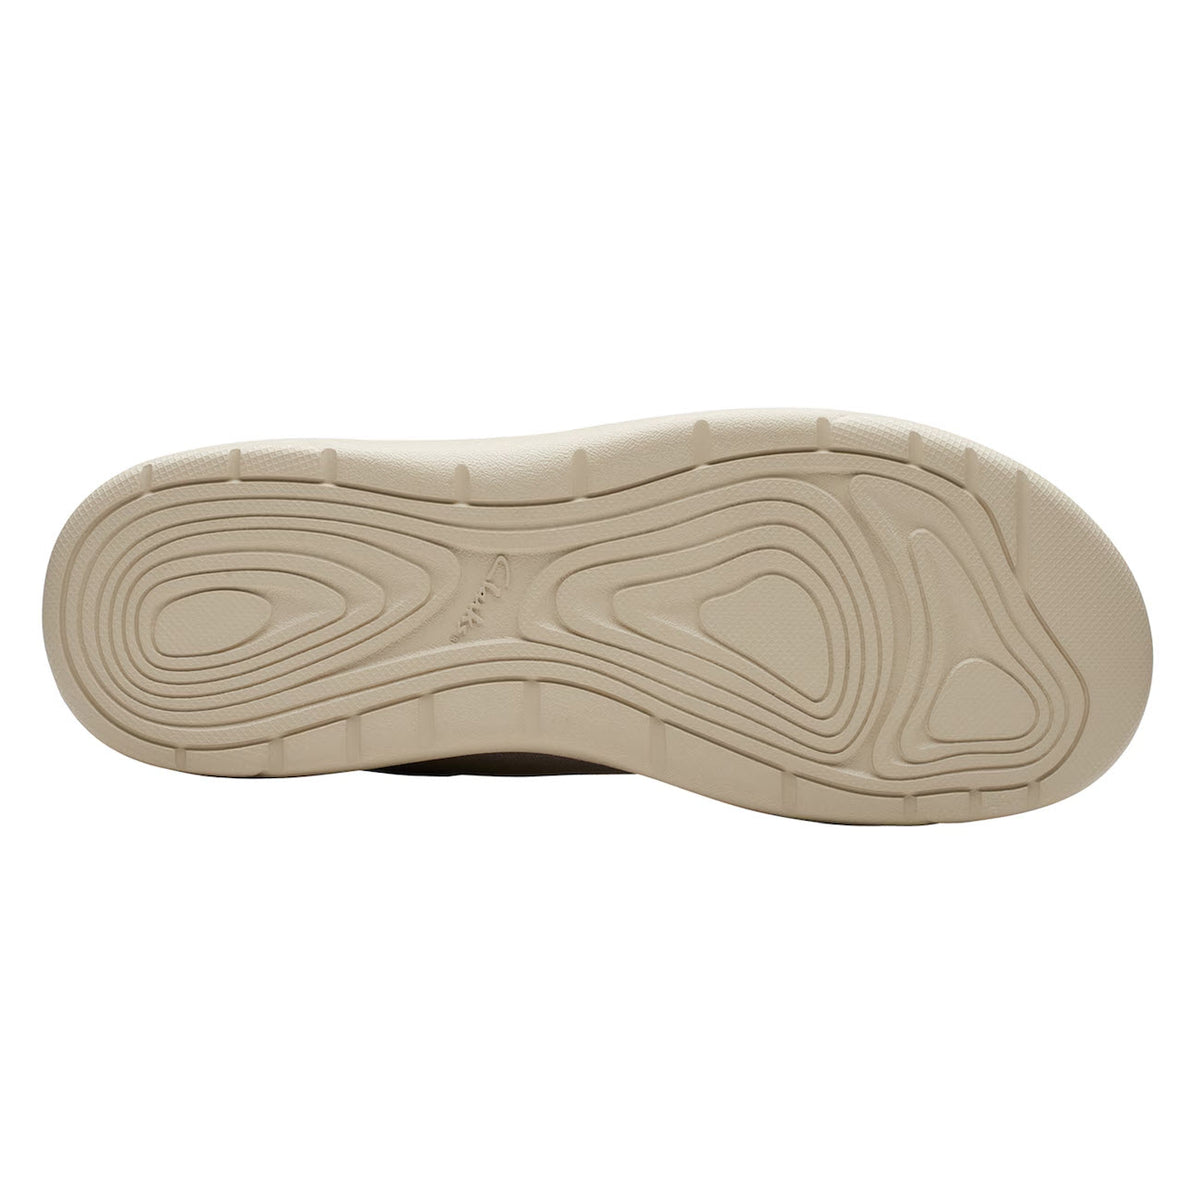 Beige EVA sole of Clarks DriftLite Surf Slip On Moc Light Grey Textured - Mens shoe with a patterned tread and embossed logo visible in the center.